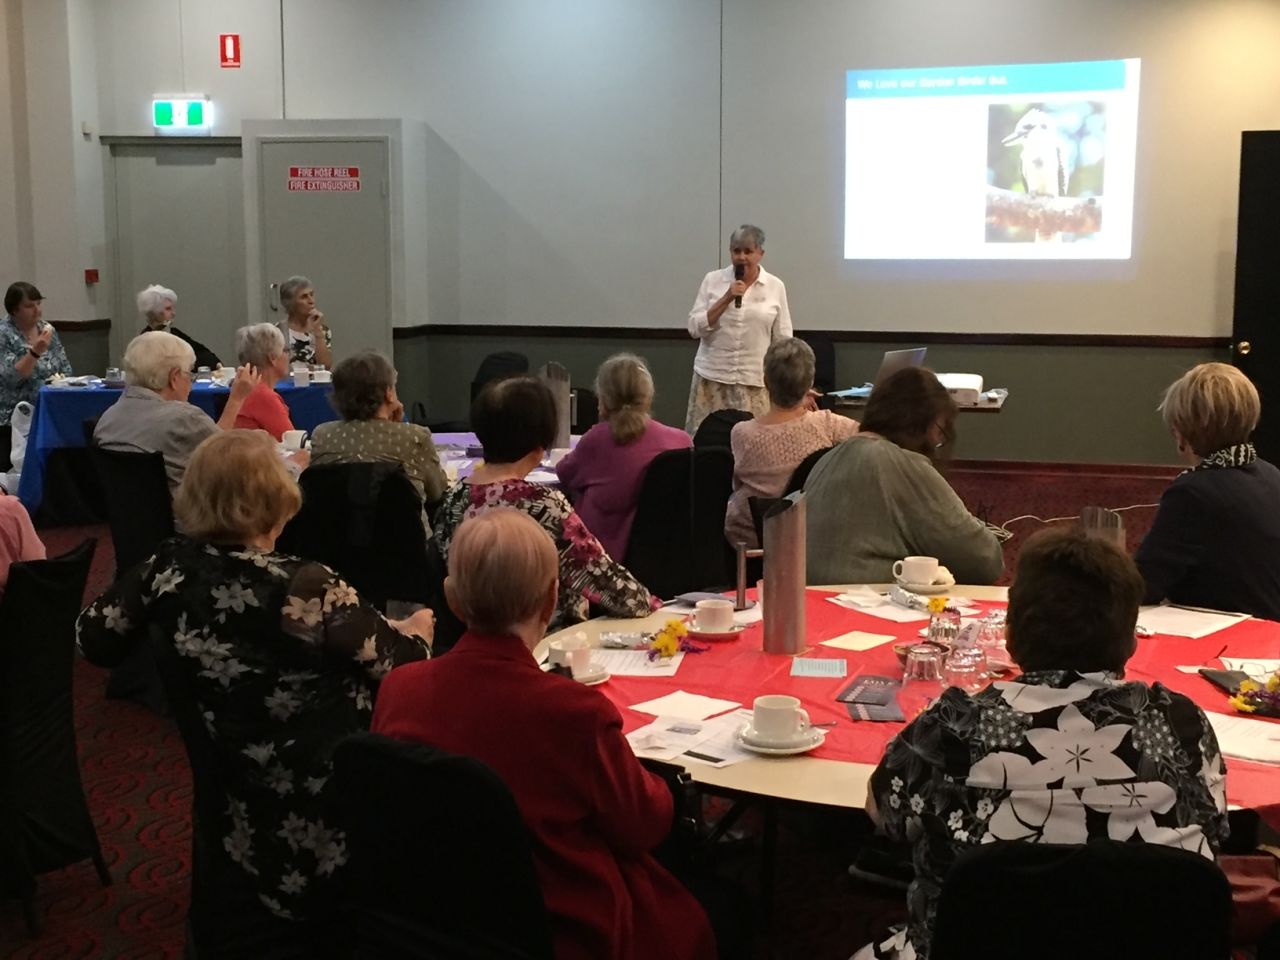 Members and guests enjoy our guest speaker, Judith Hoyle from Bird Life Southern Queensland during the May 2021 Coorparoo Branch meeting